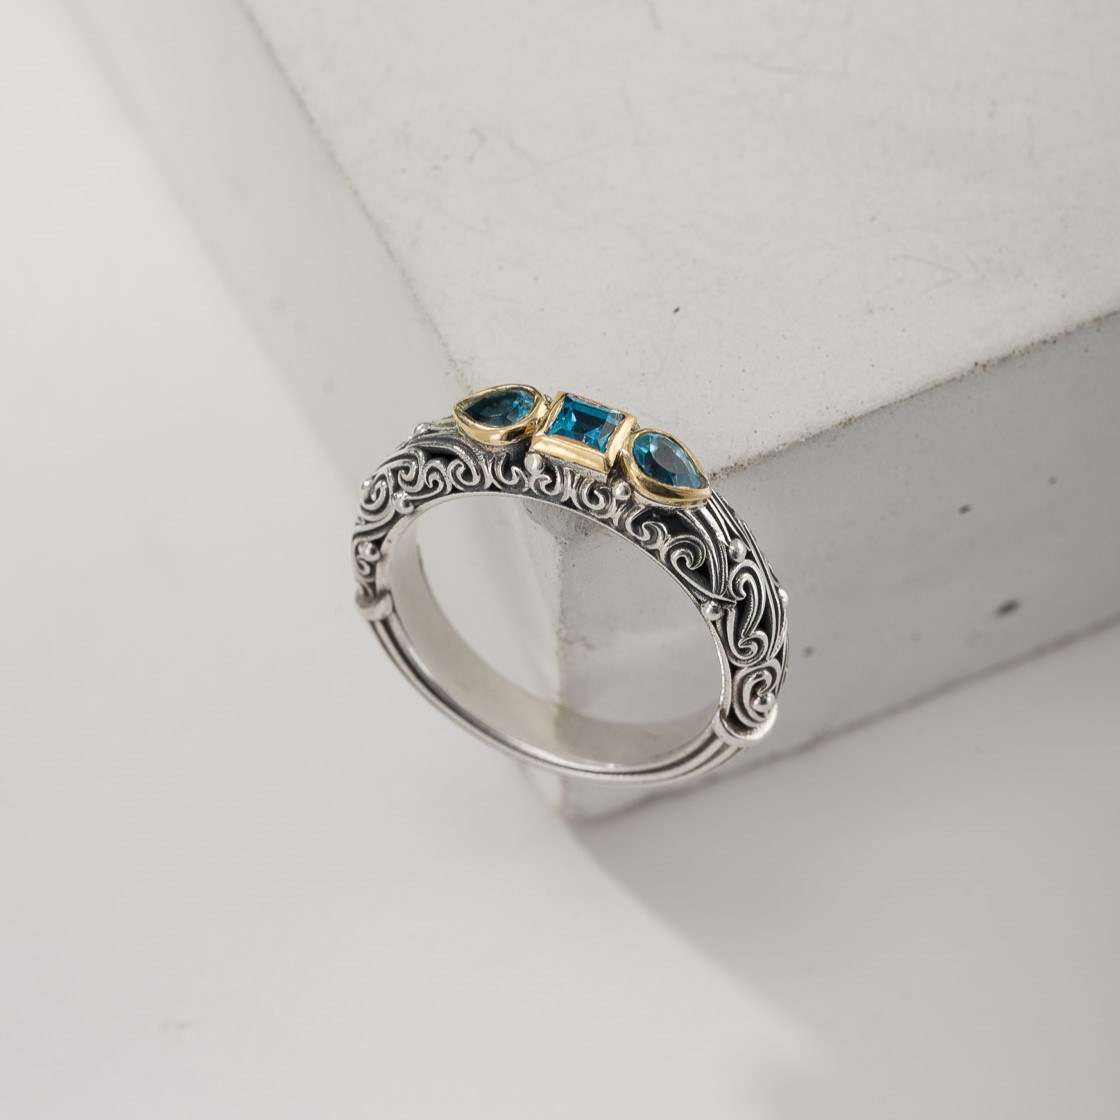 Kynthia Ring in 18K Gold and Sterling Silver with 3 semi precious stone